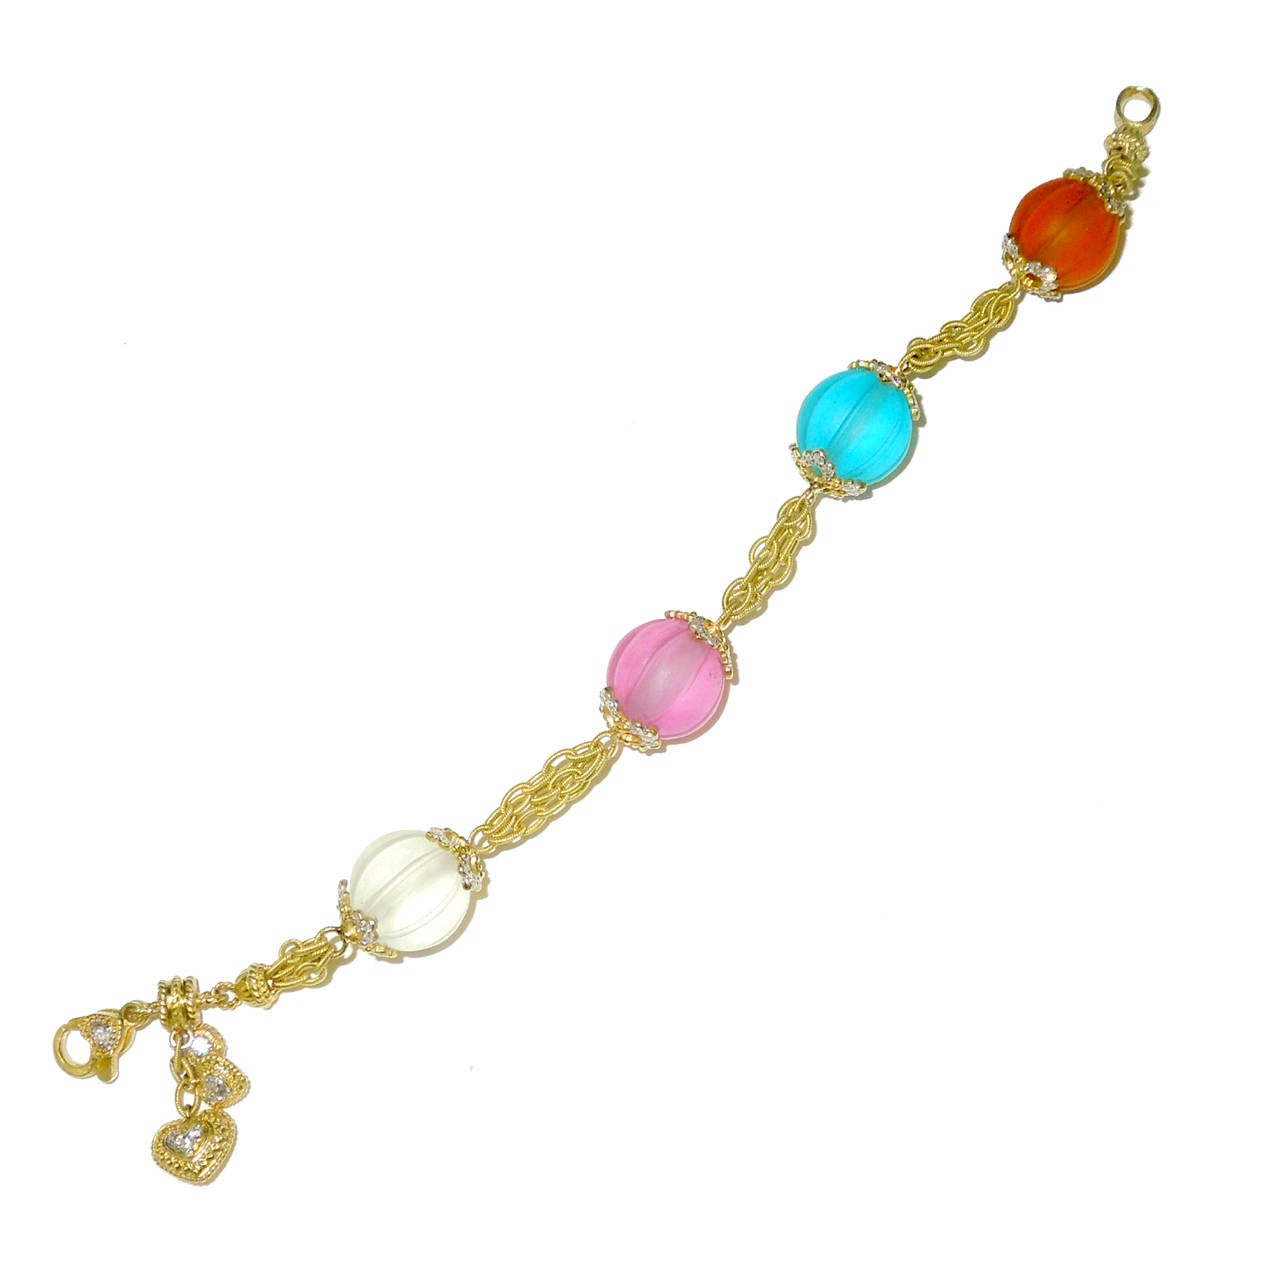 18k Gold Ring with 4 Frosted Multi-Color Quartz bracelet 

Quartz are 13mm each and special-cut & frosted

18K Gold Links make up the bracelet 

3 Gold & Diamond Heart drops are seen next to the lobster clasp, 3 different sizes

Diamond cups